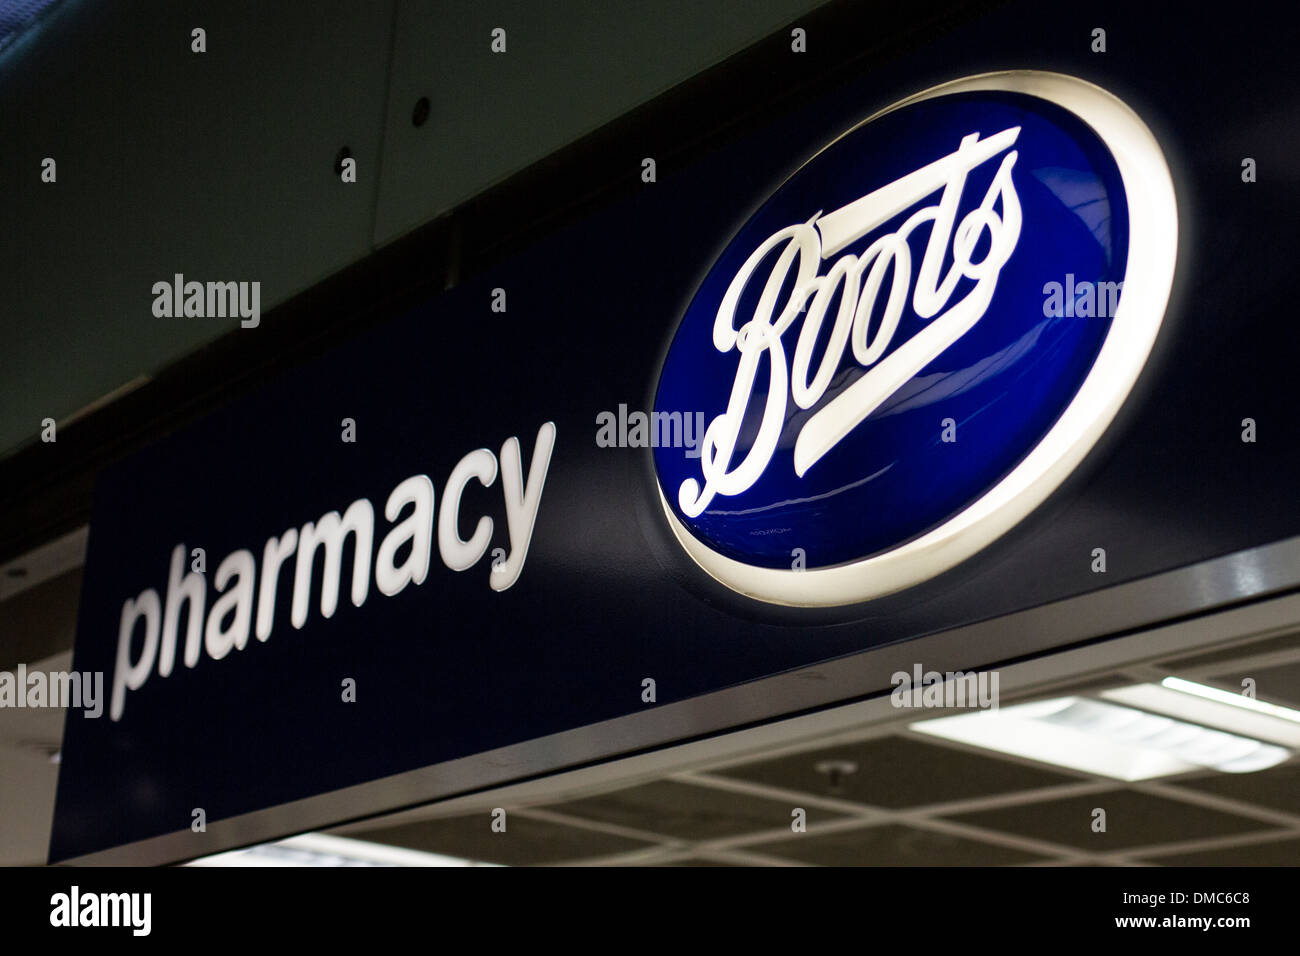 Boots Logo High Resolution Stock Photography and Images - Alamy